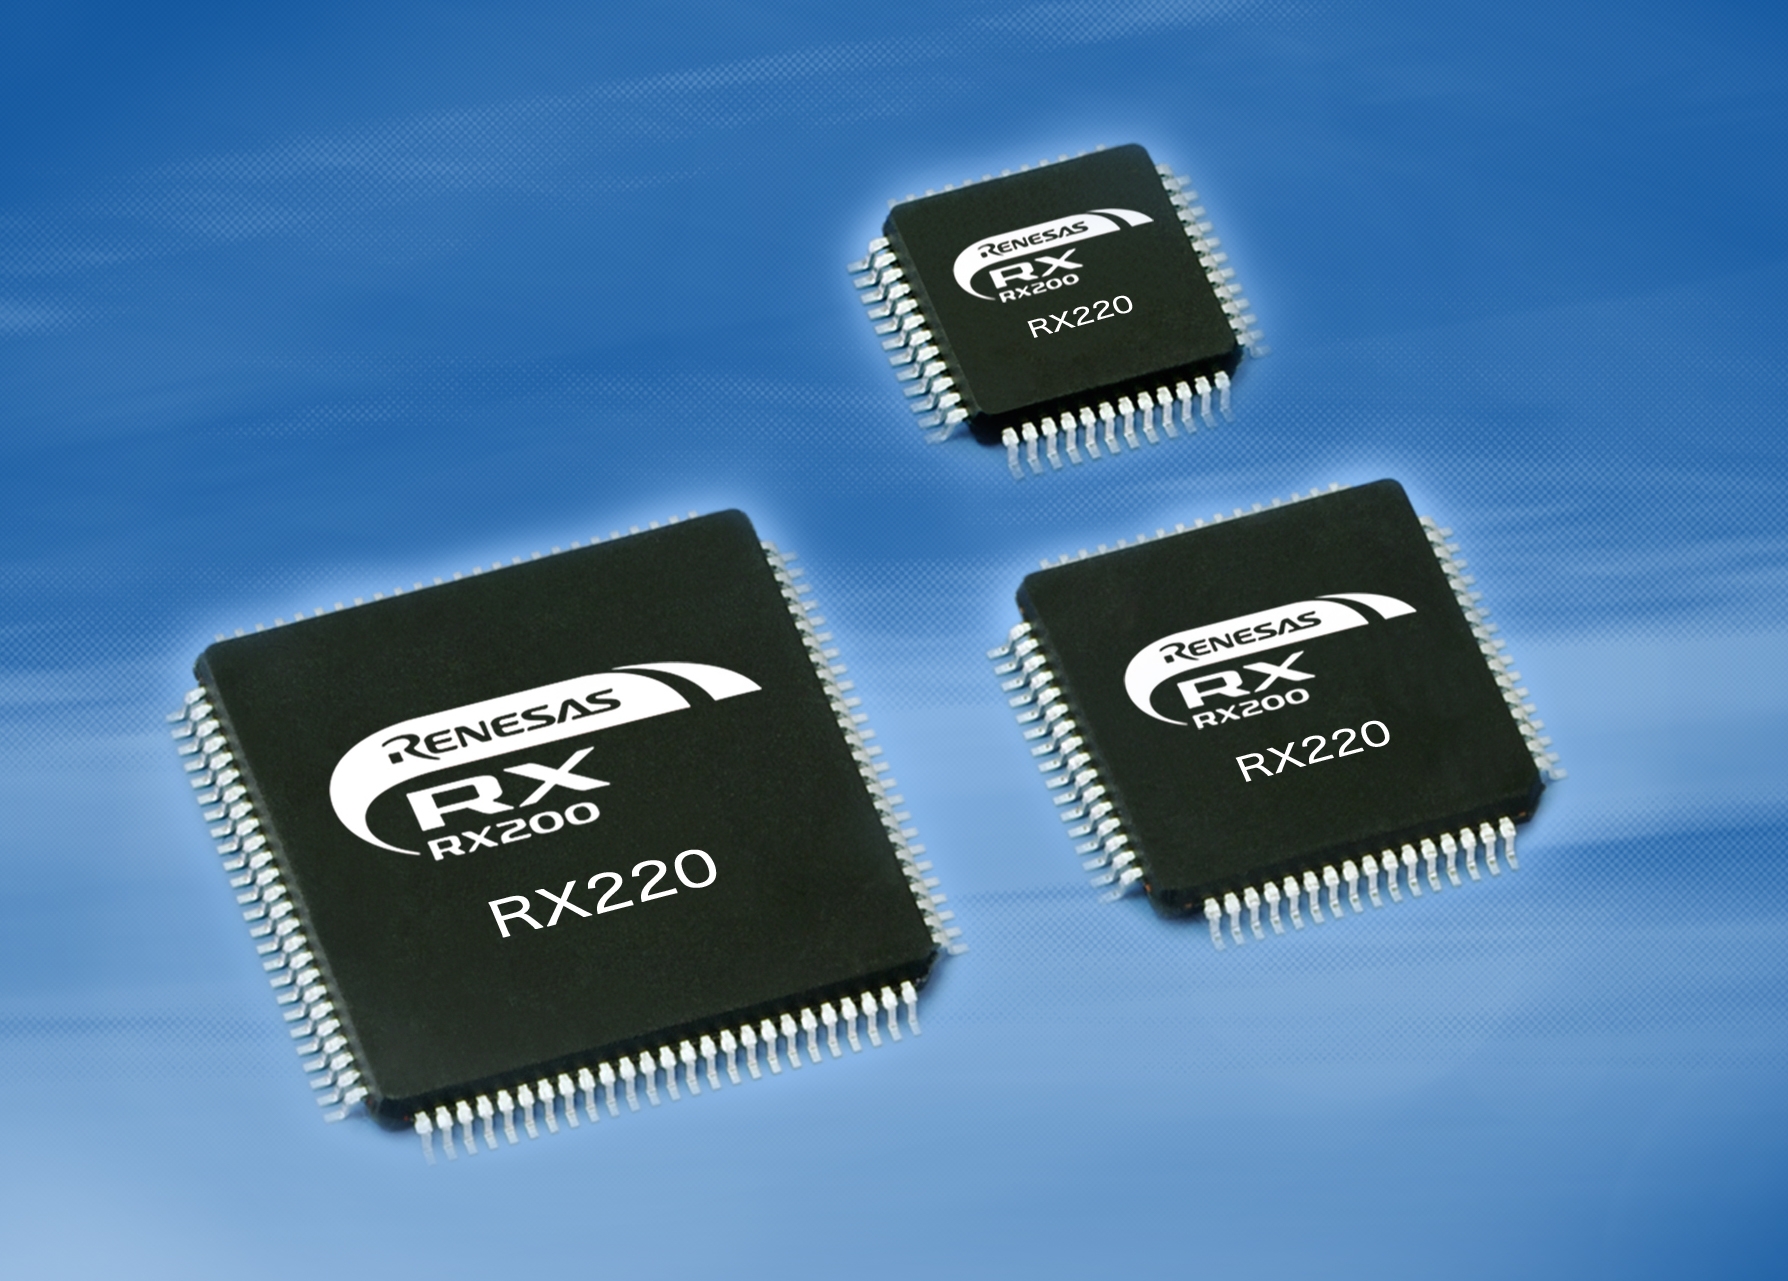 Figure 3 - Renesas’ motor control kit, based on the RX220, can provide 50 DMIPS and is optimised for equipment that needs medium dynamics but is also cost-sensitive.